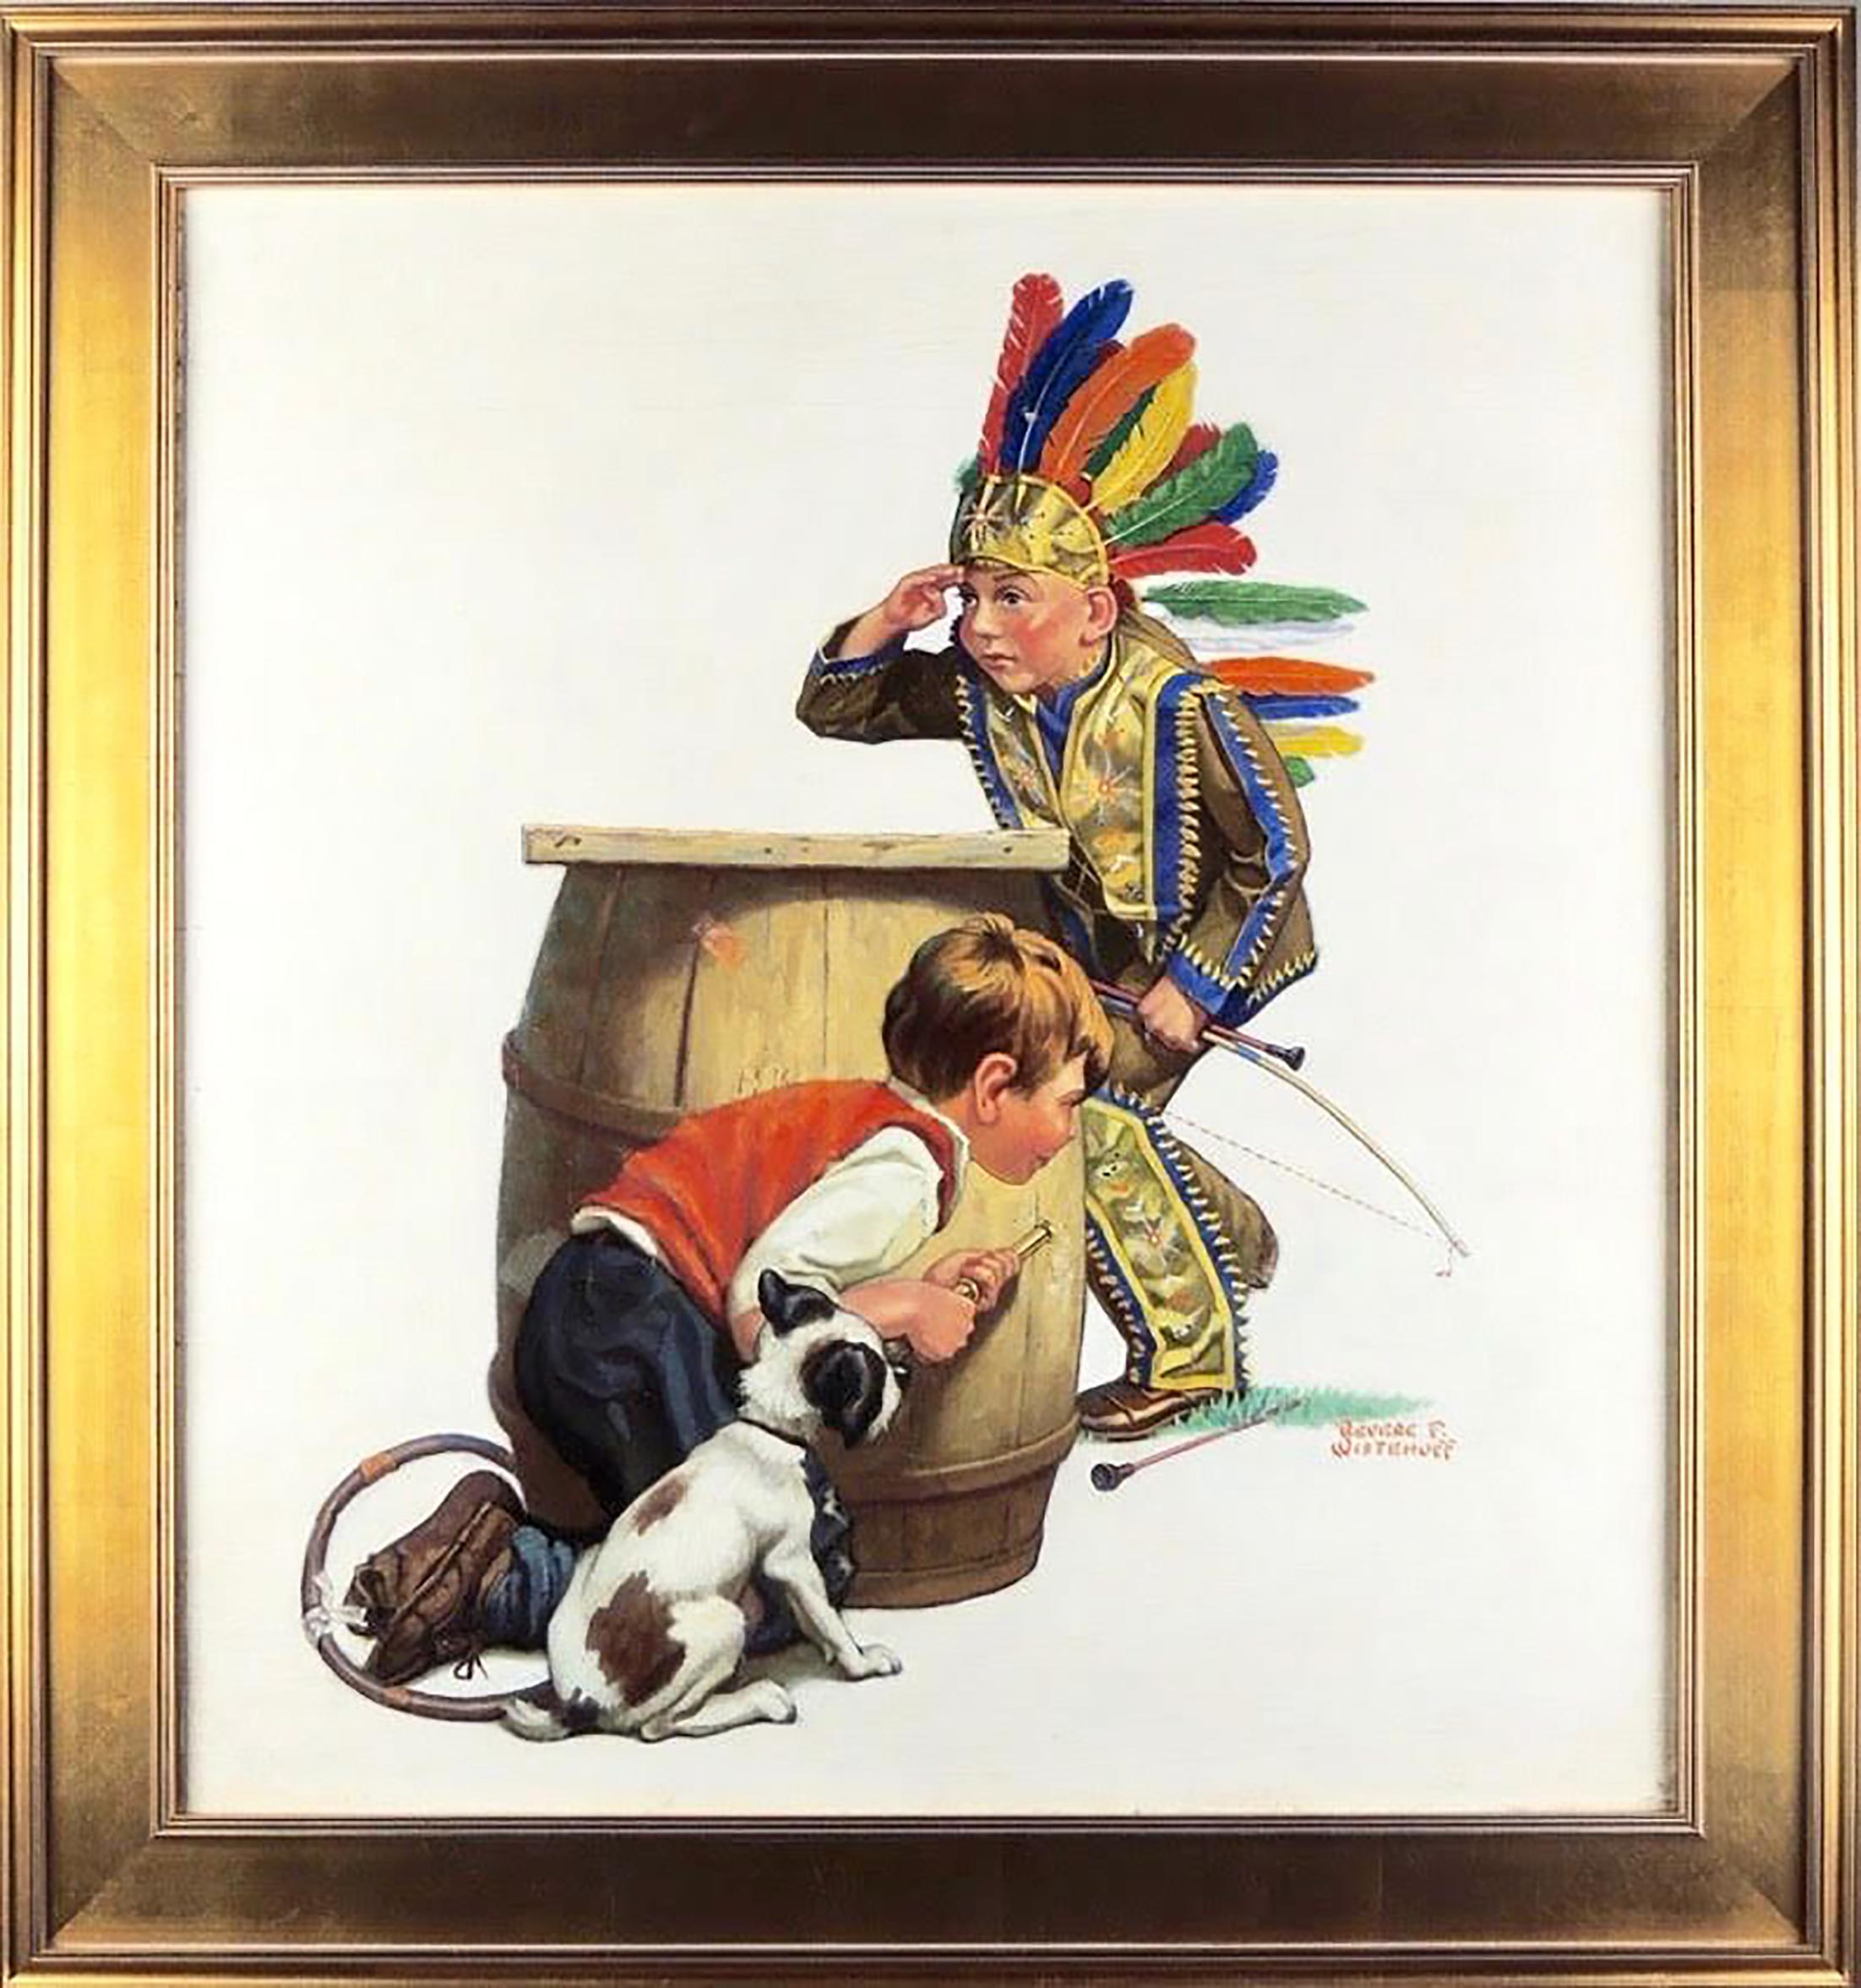 Boys Playing - Painting by Revere Wistehuff